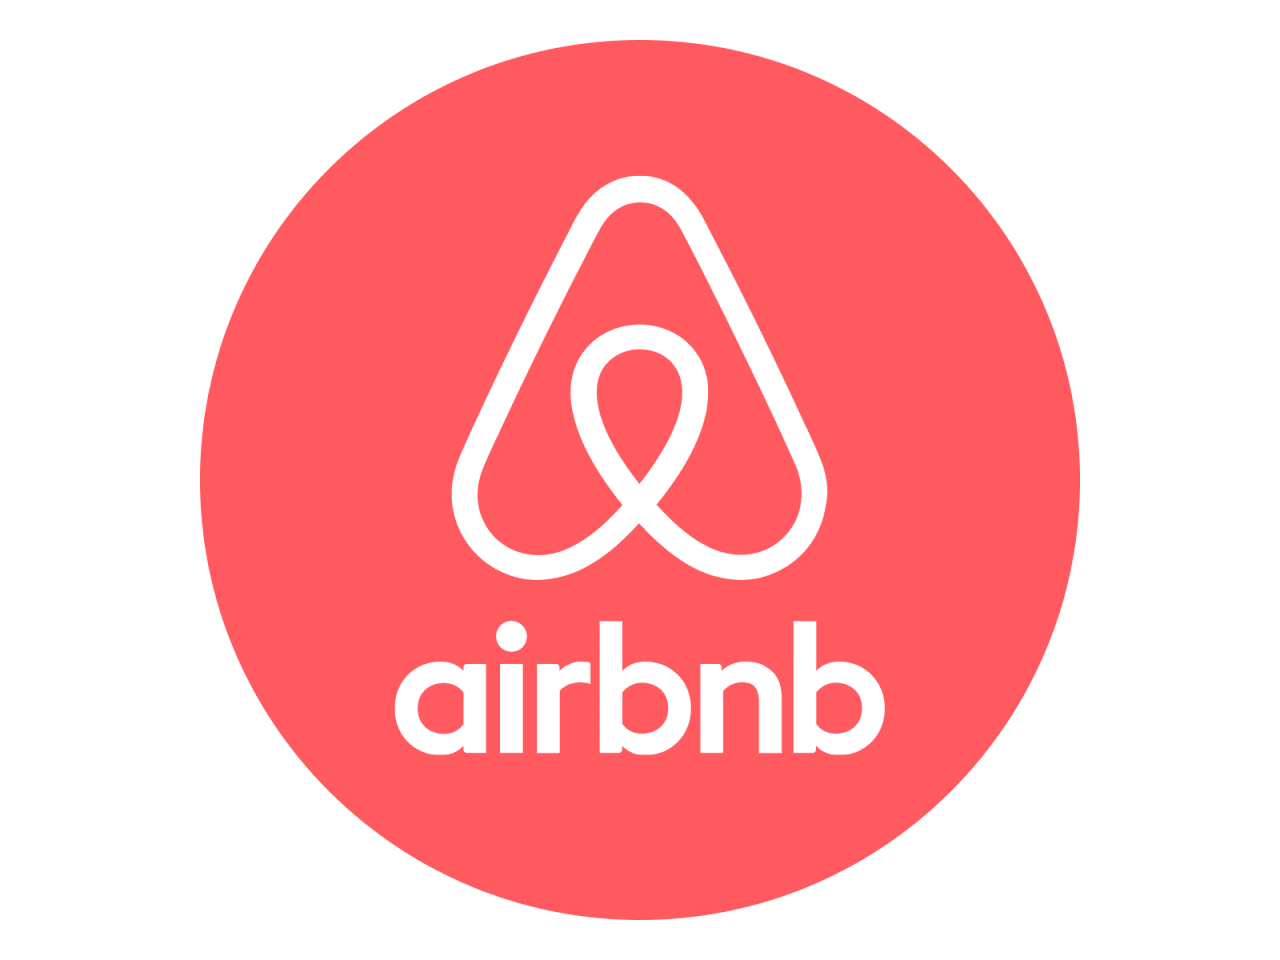 Airbnb tips